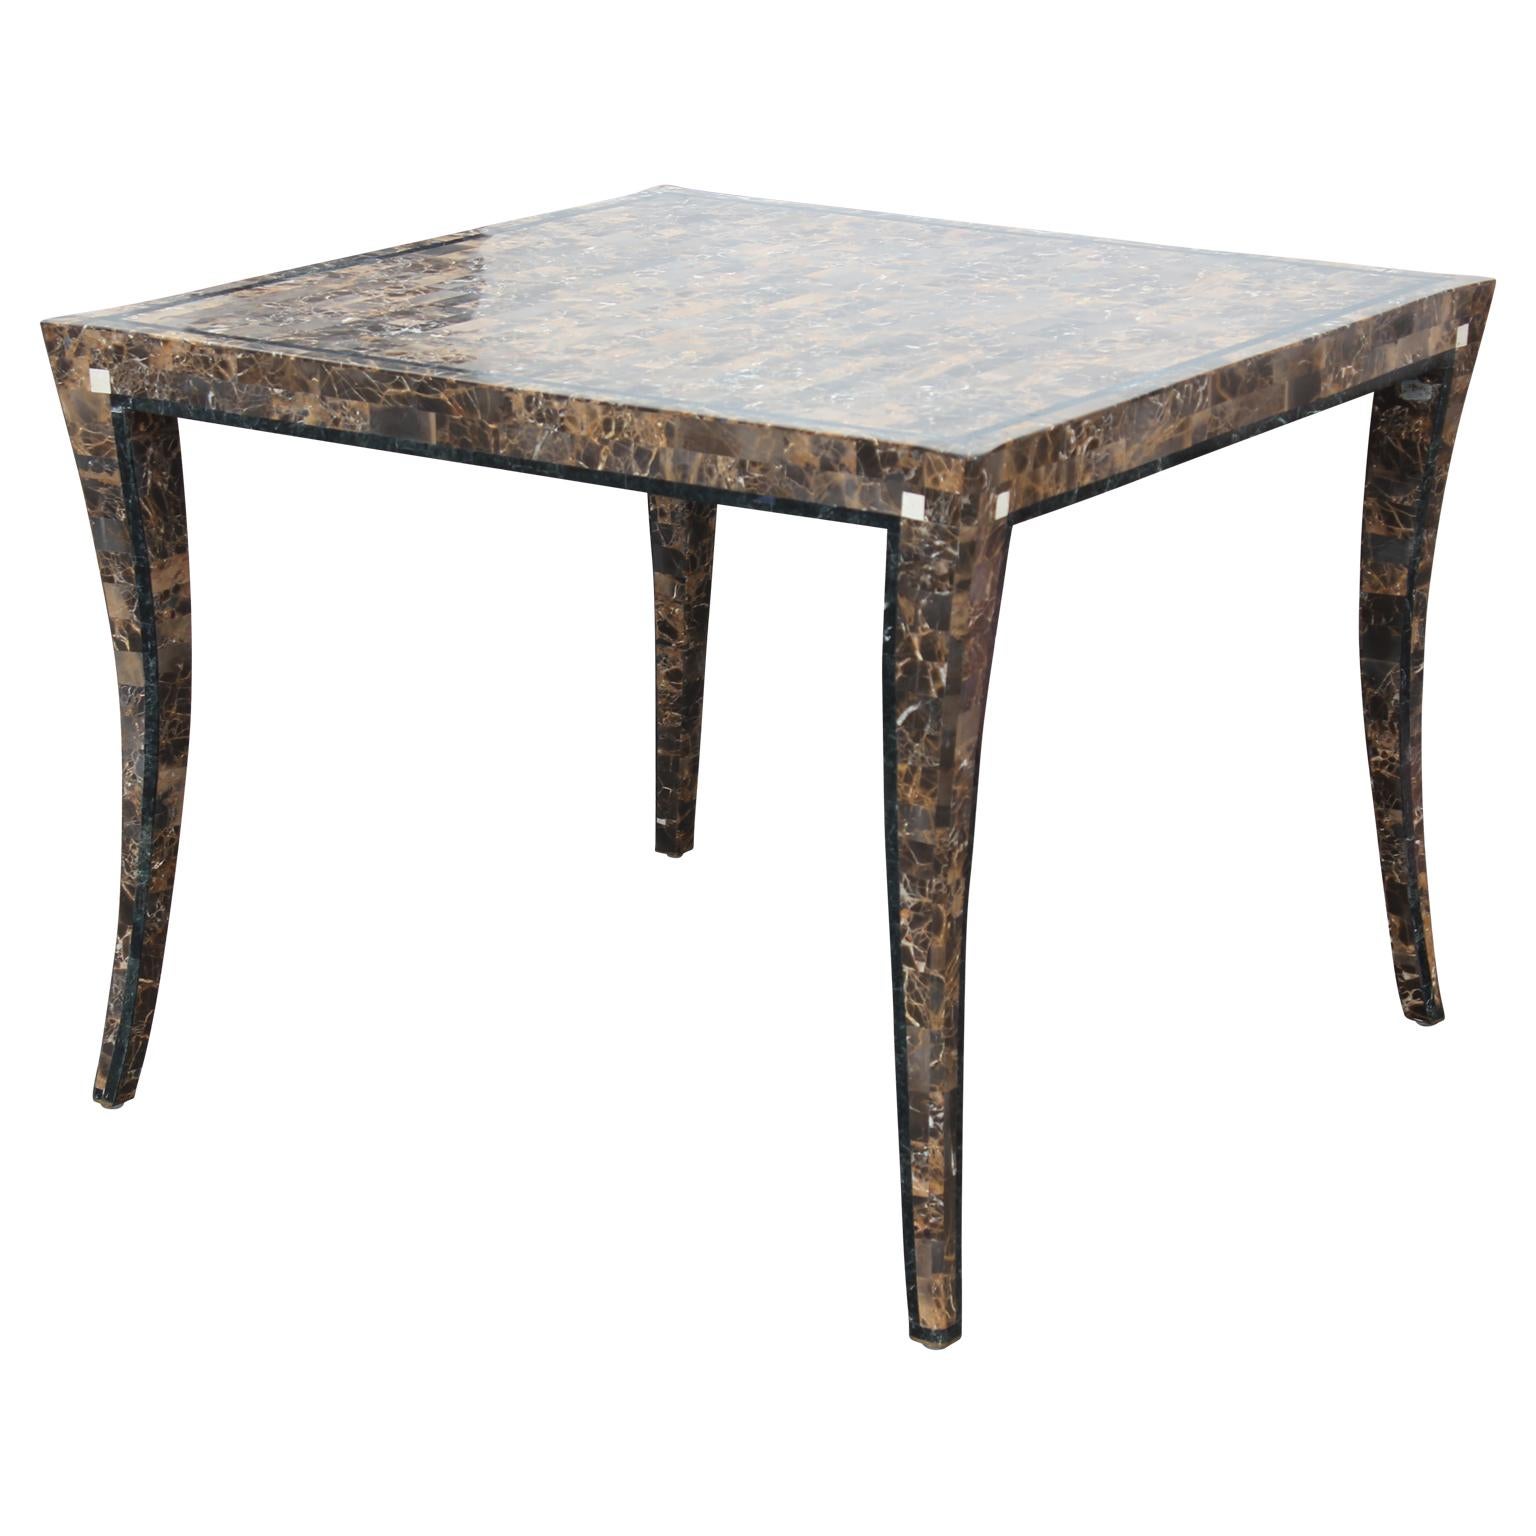 Intricate dark marble inlaid tessellated klismos fossil marble game table made by Maitland-Smith.